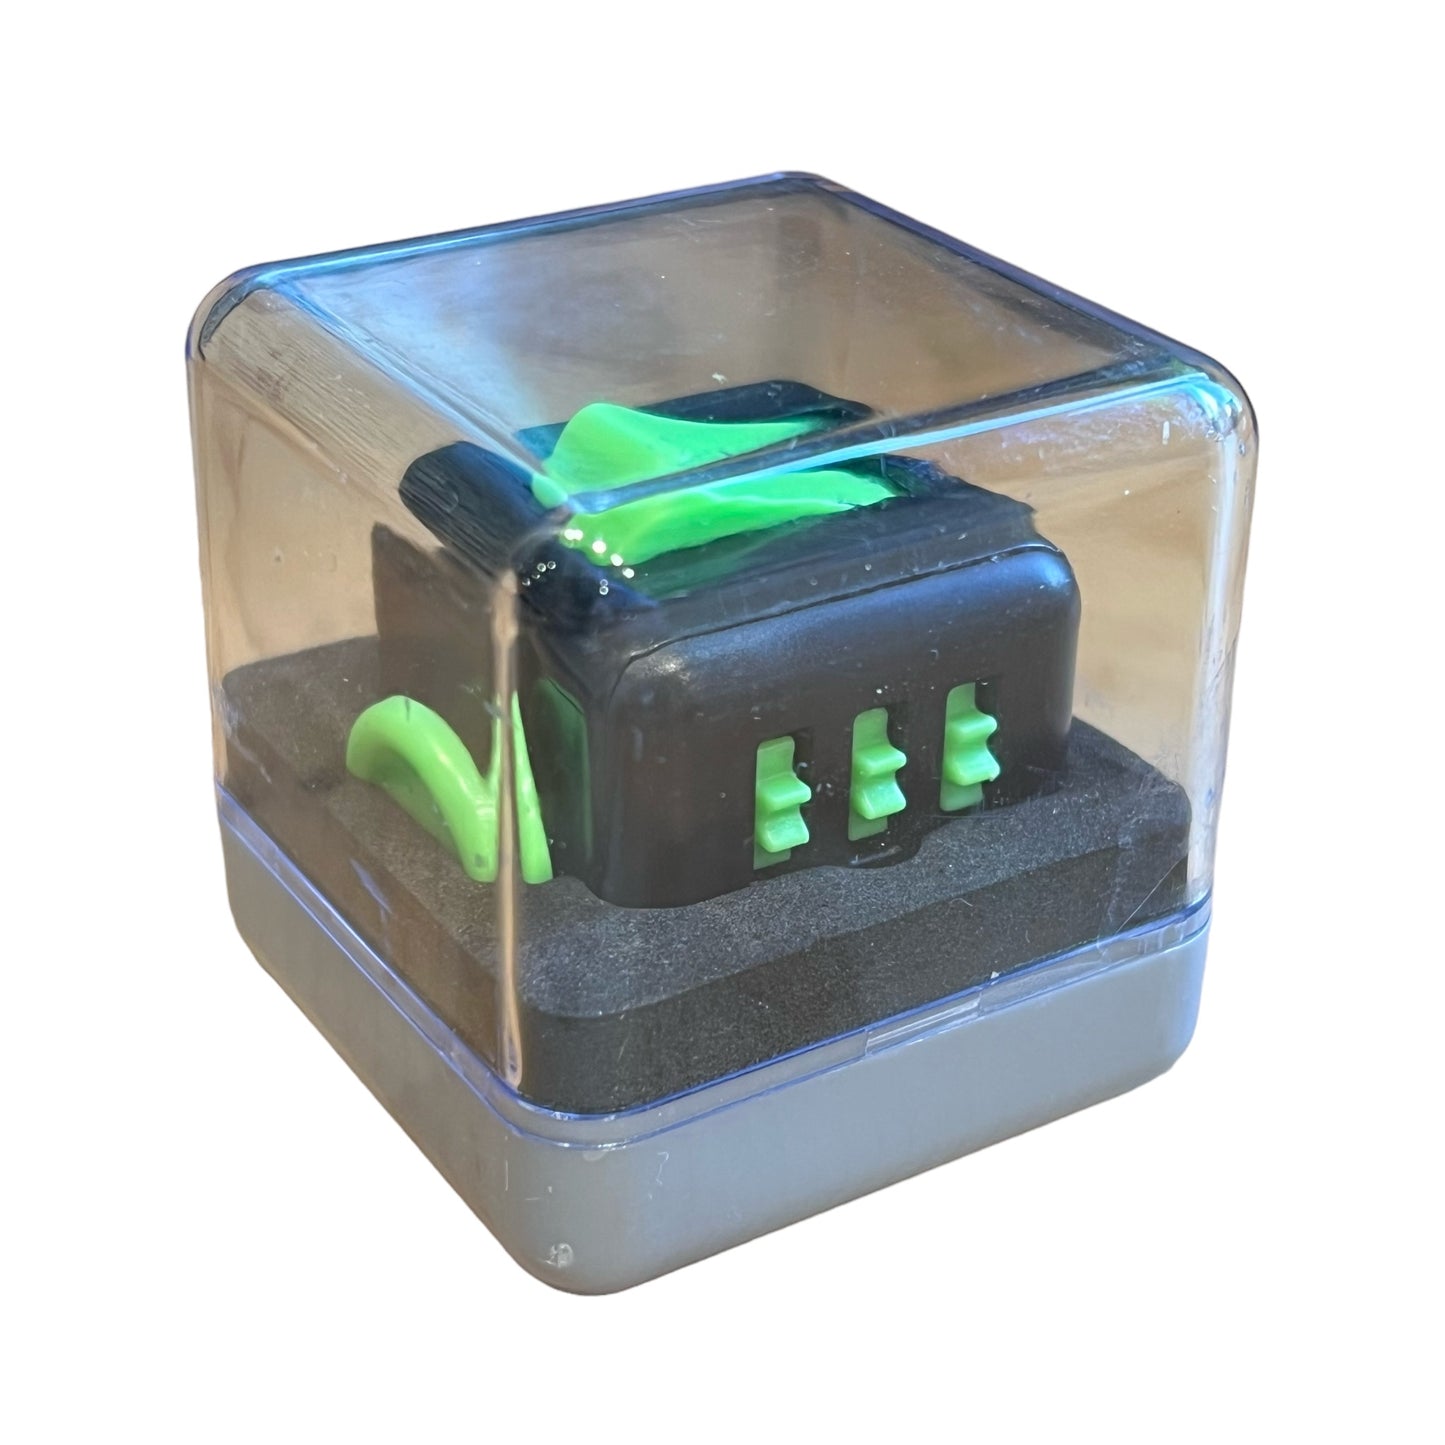 6 Sided Fidget Cube with Protective Display/Case